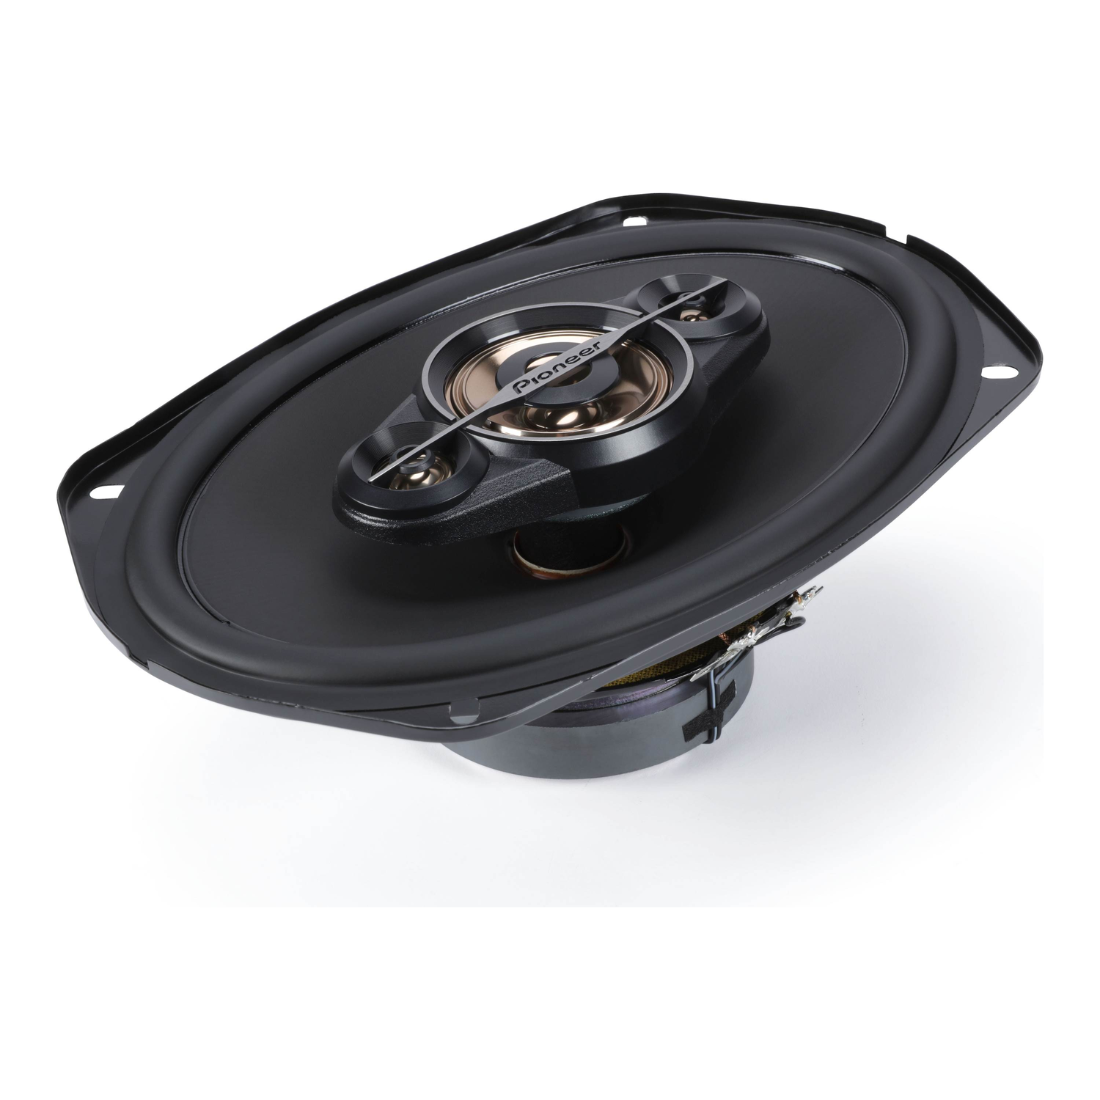 Pioneer TS-A6971F 6" x 9" 4-Way 600W Max 4-Ohm Car Audio Coaxial Speakers (Pair)